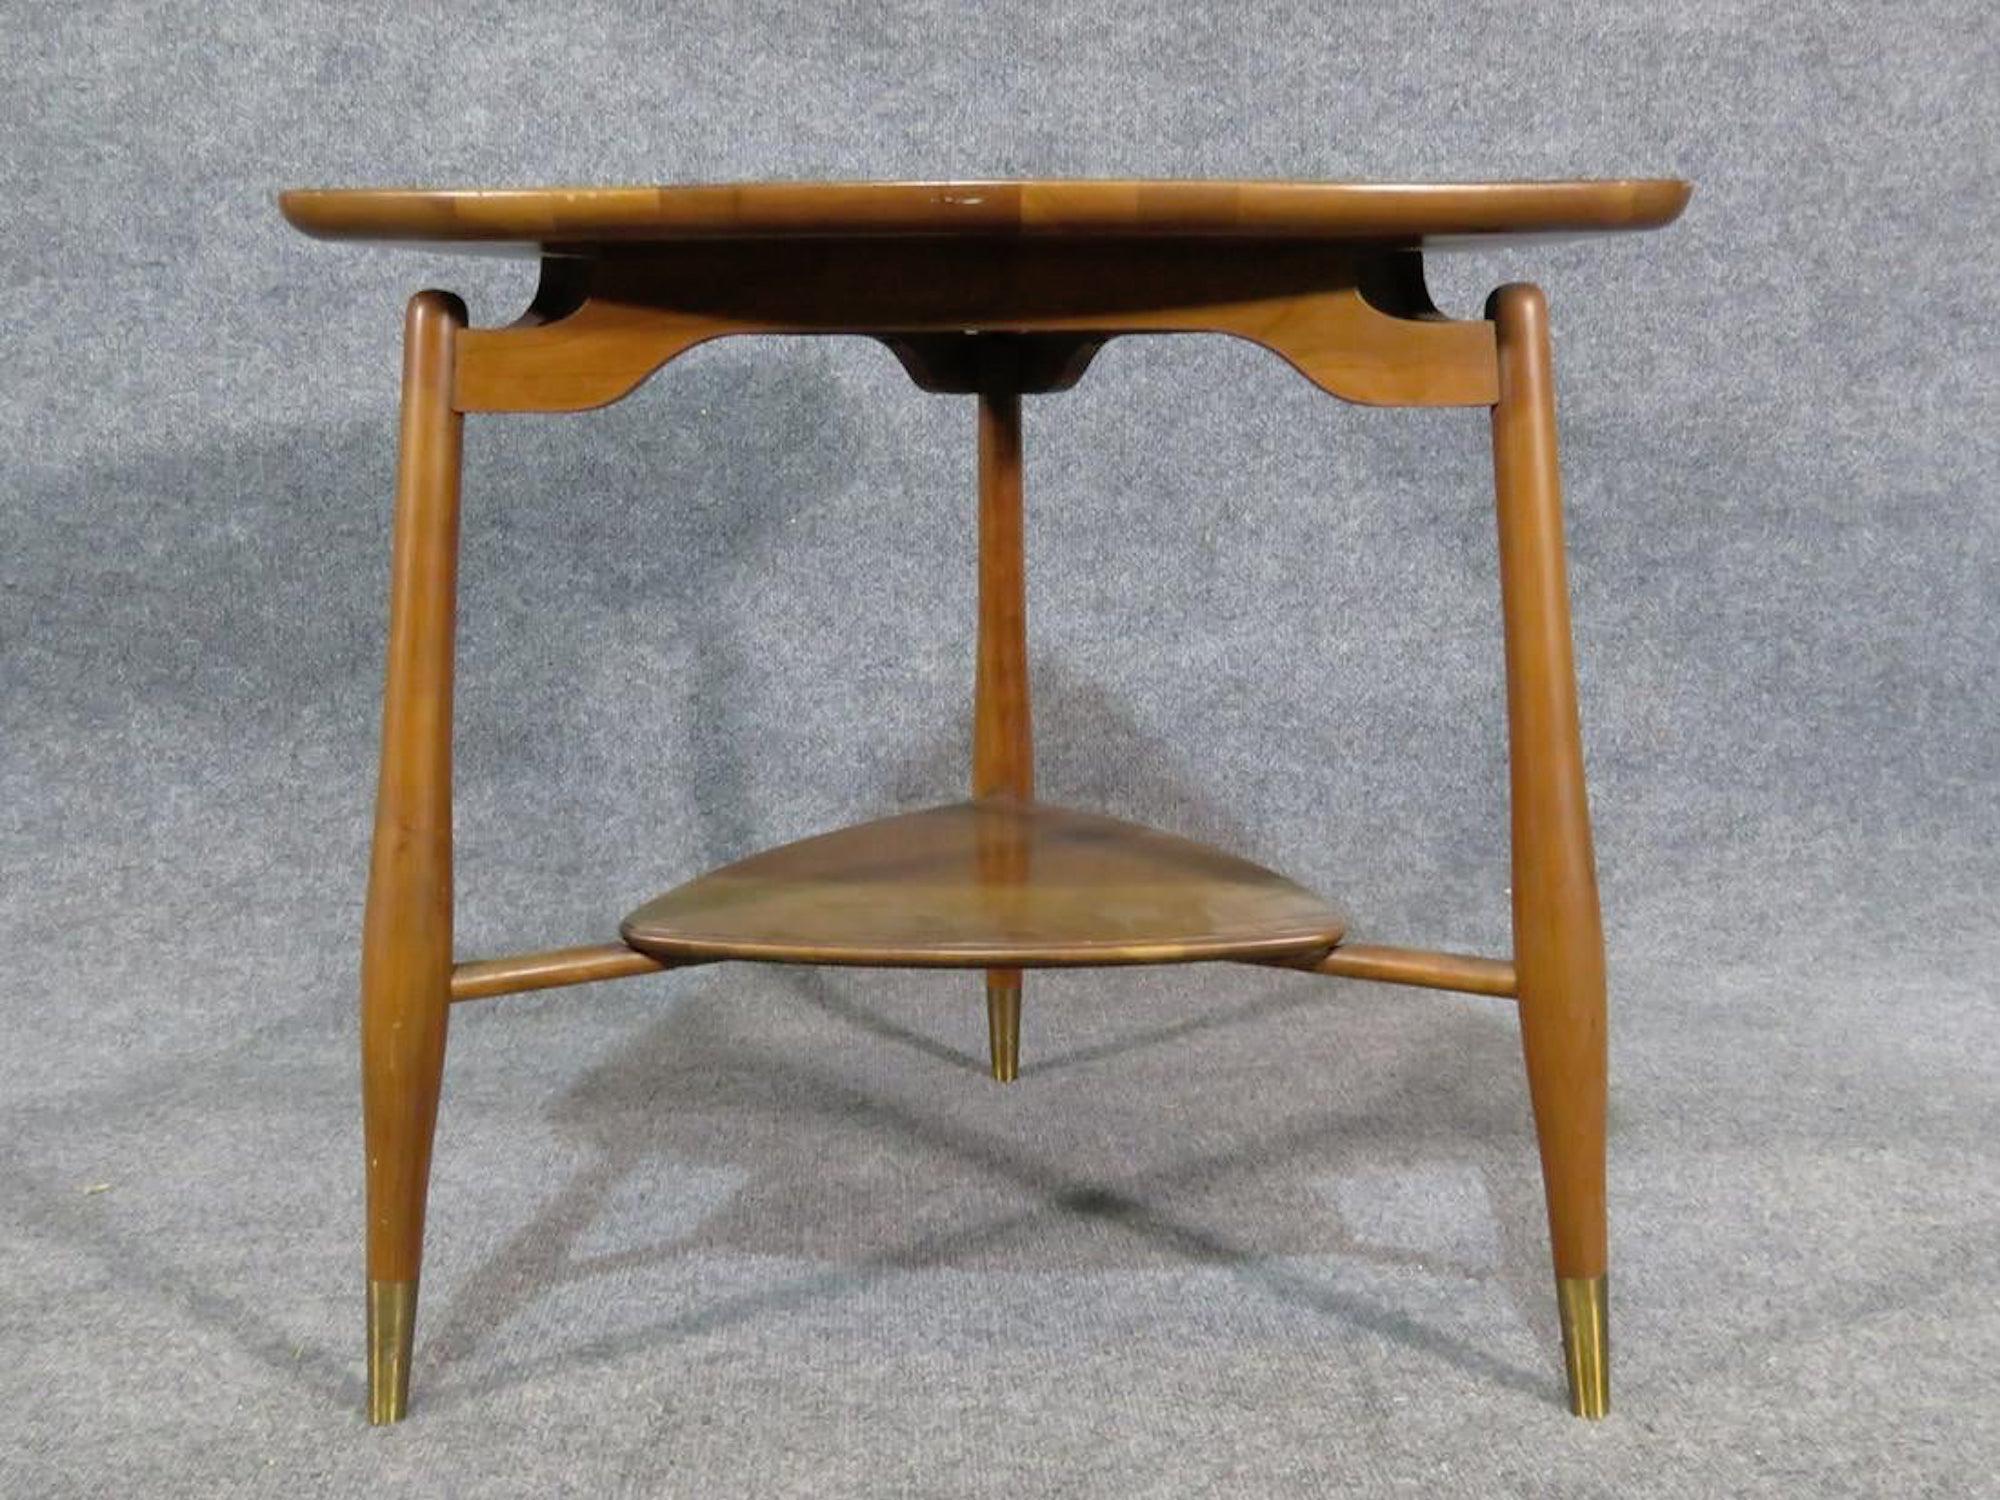 Walnut end table with sculpted sides and bottom shelf made by John Widdicomb.
(Please confirm item location - NY or NJ - with dealer).
  